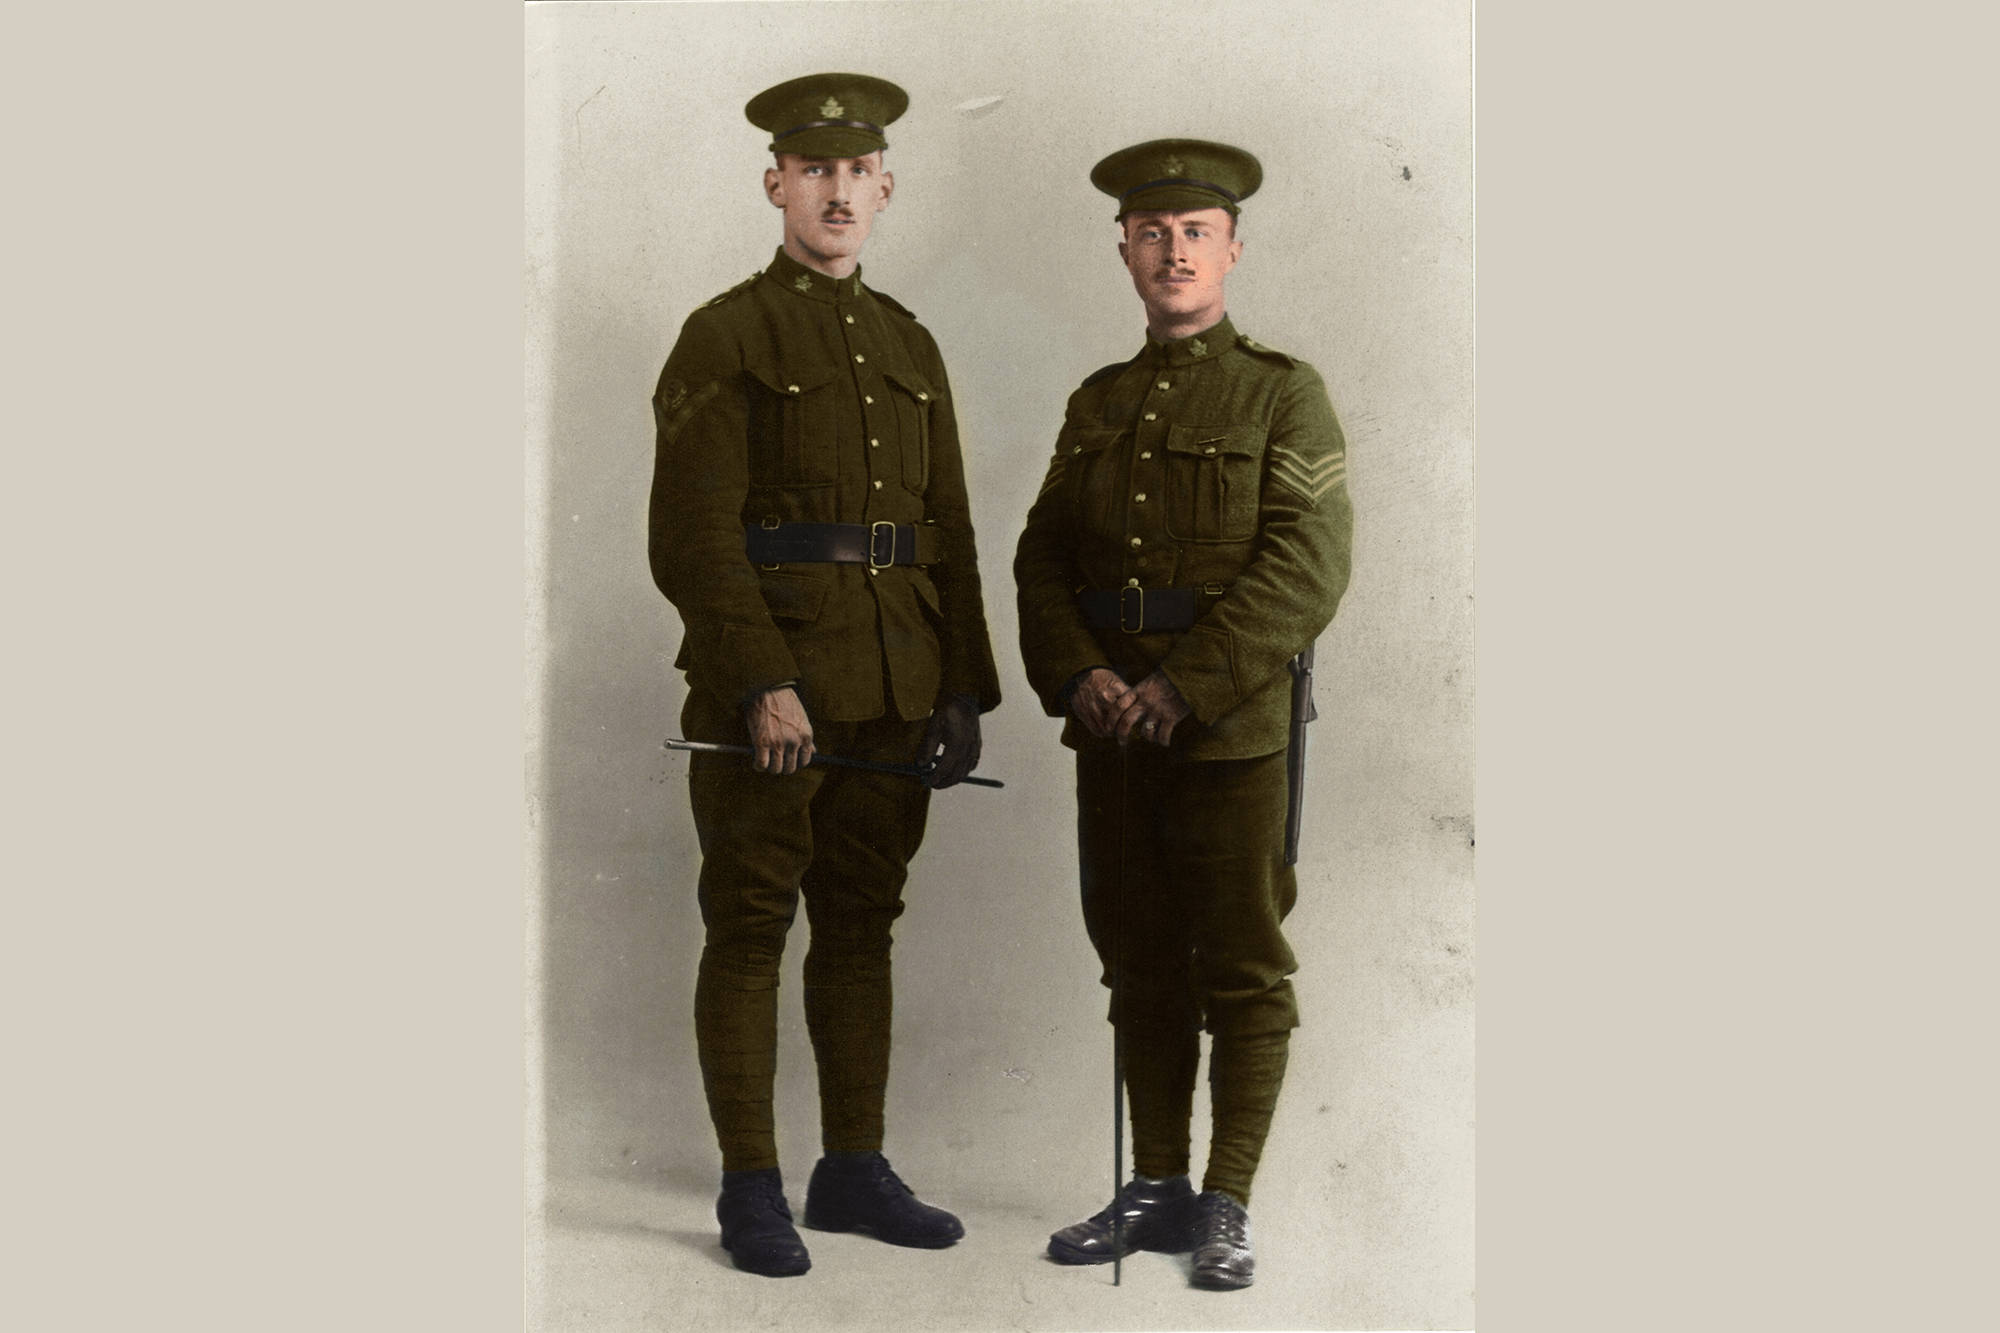 23277855_web1_McLachlanP_Coloured_lcpl_Knowles-and-Sergeant-Jack_WEB